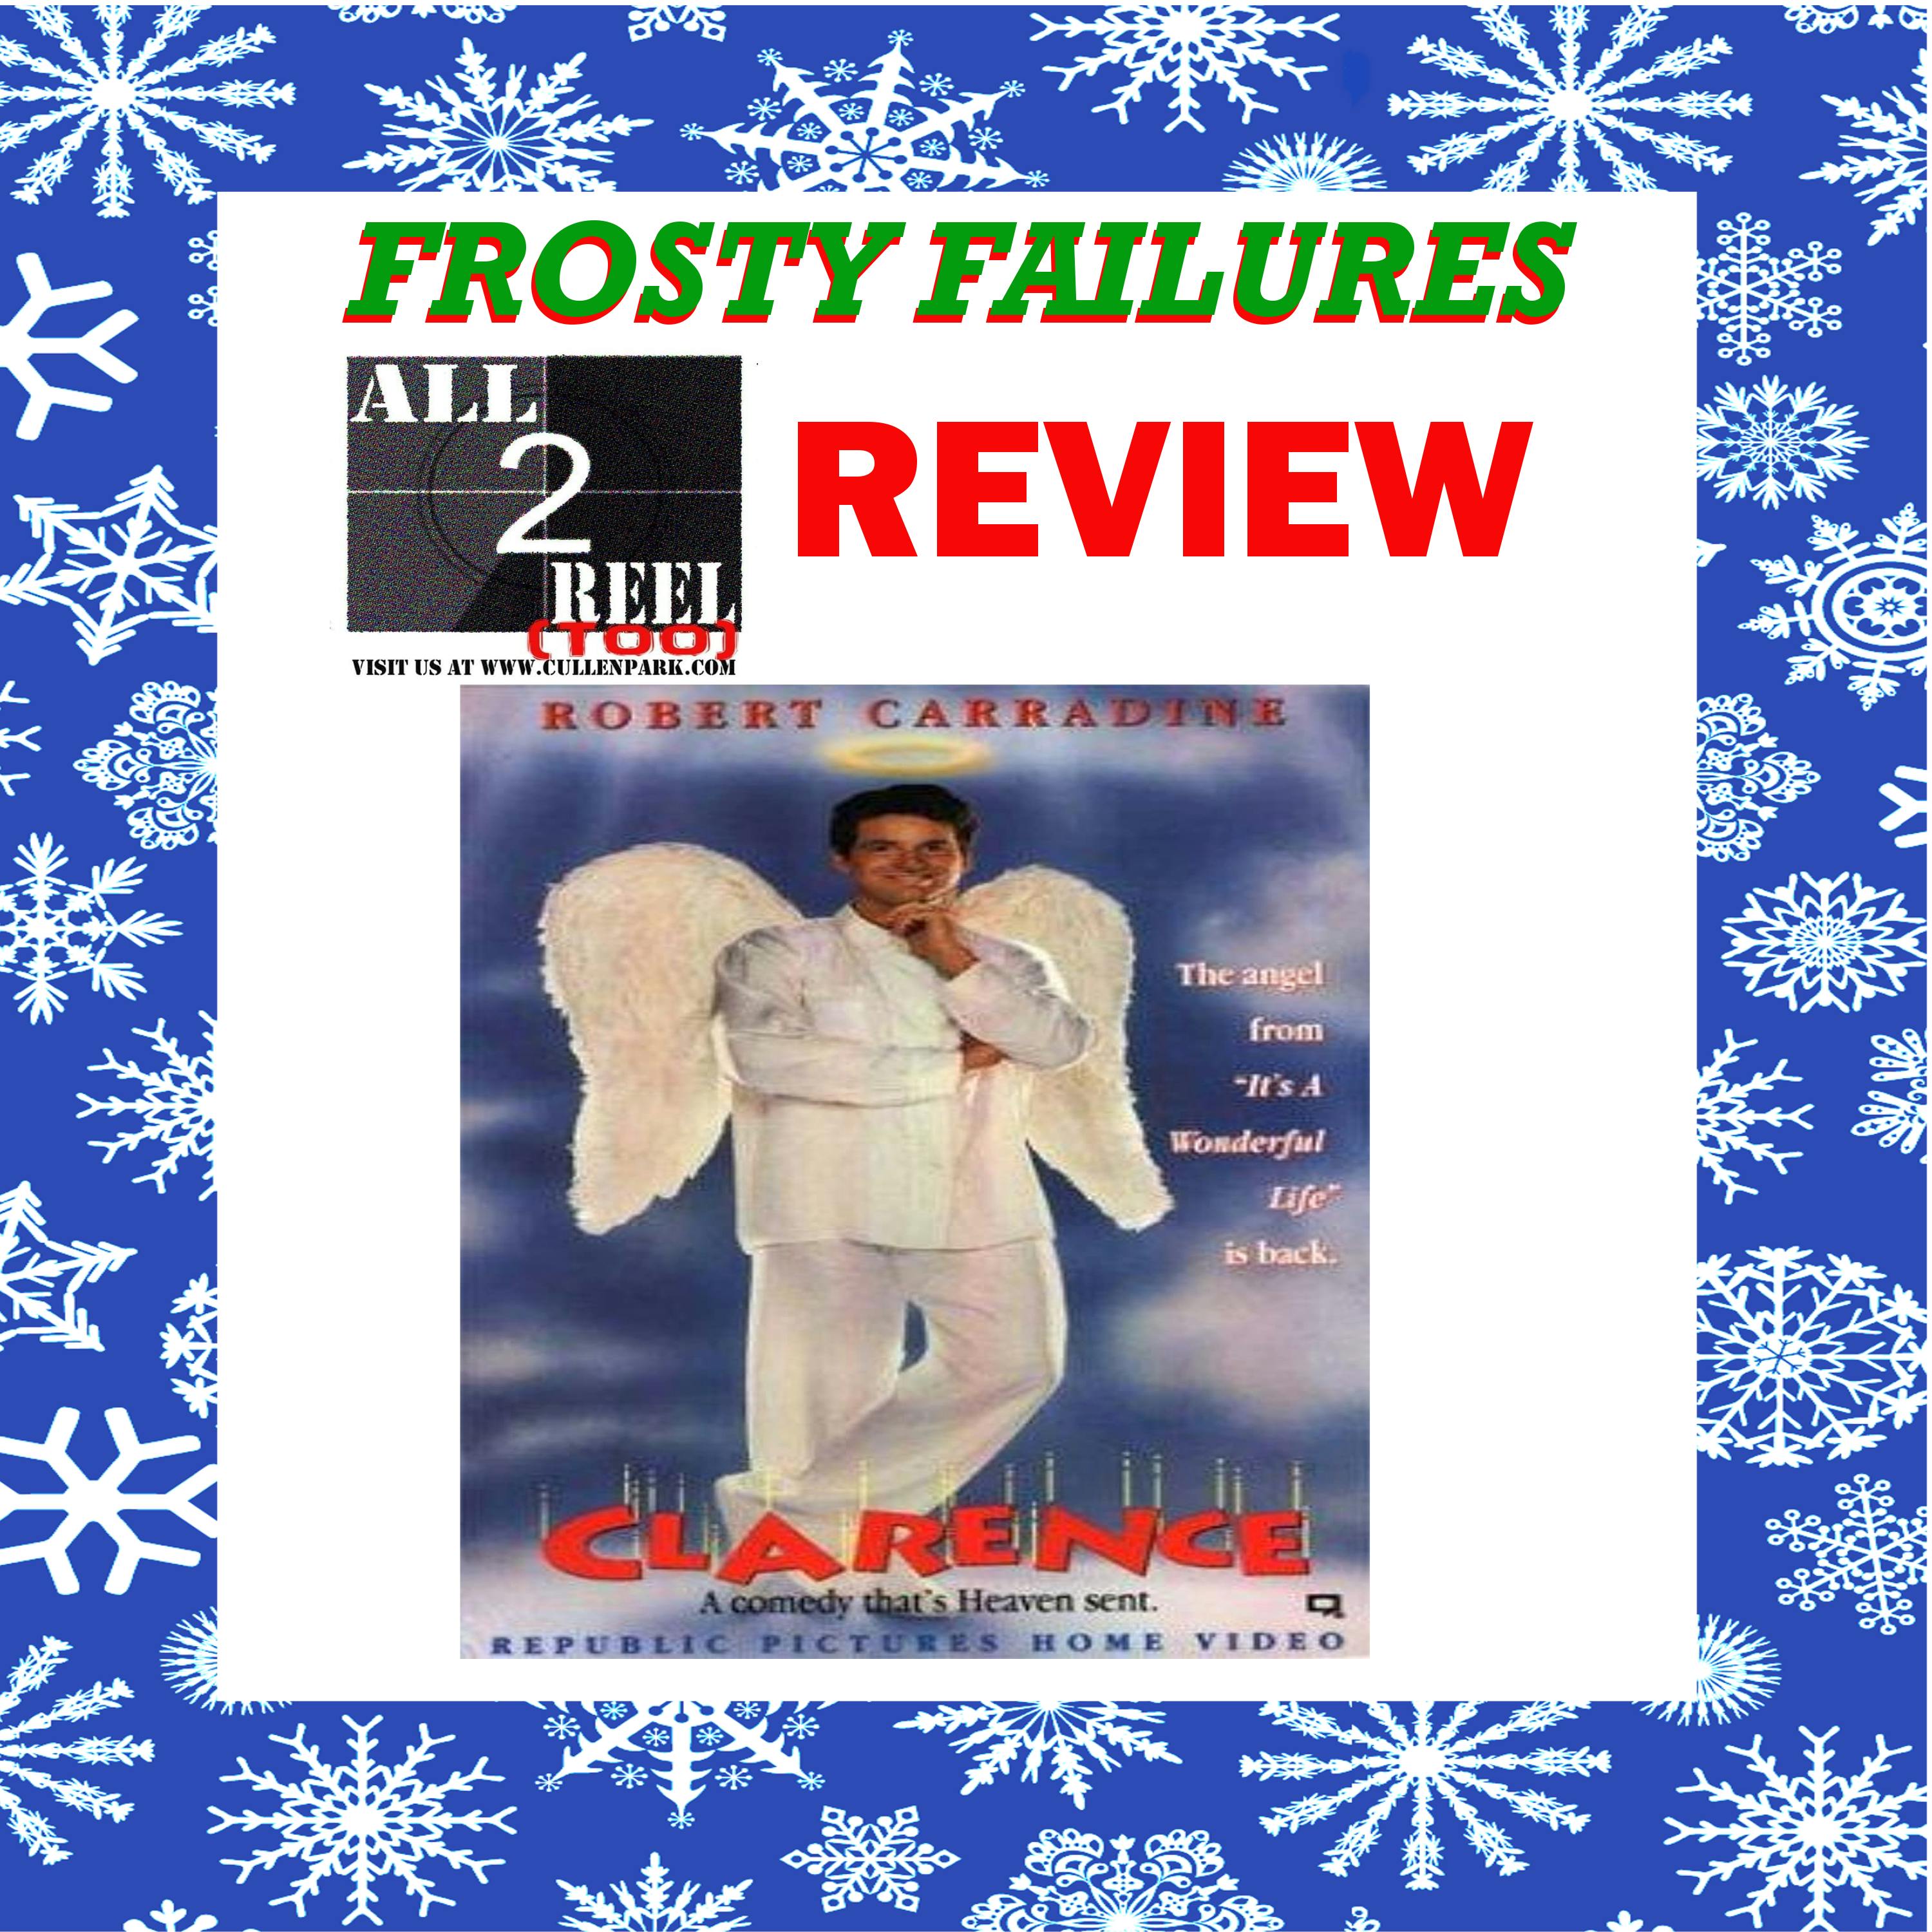 Clarence (1990) - FROSTY FAILURES/DIRECT FROM HELL REVIEW Image